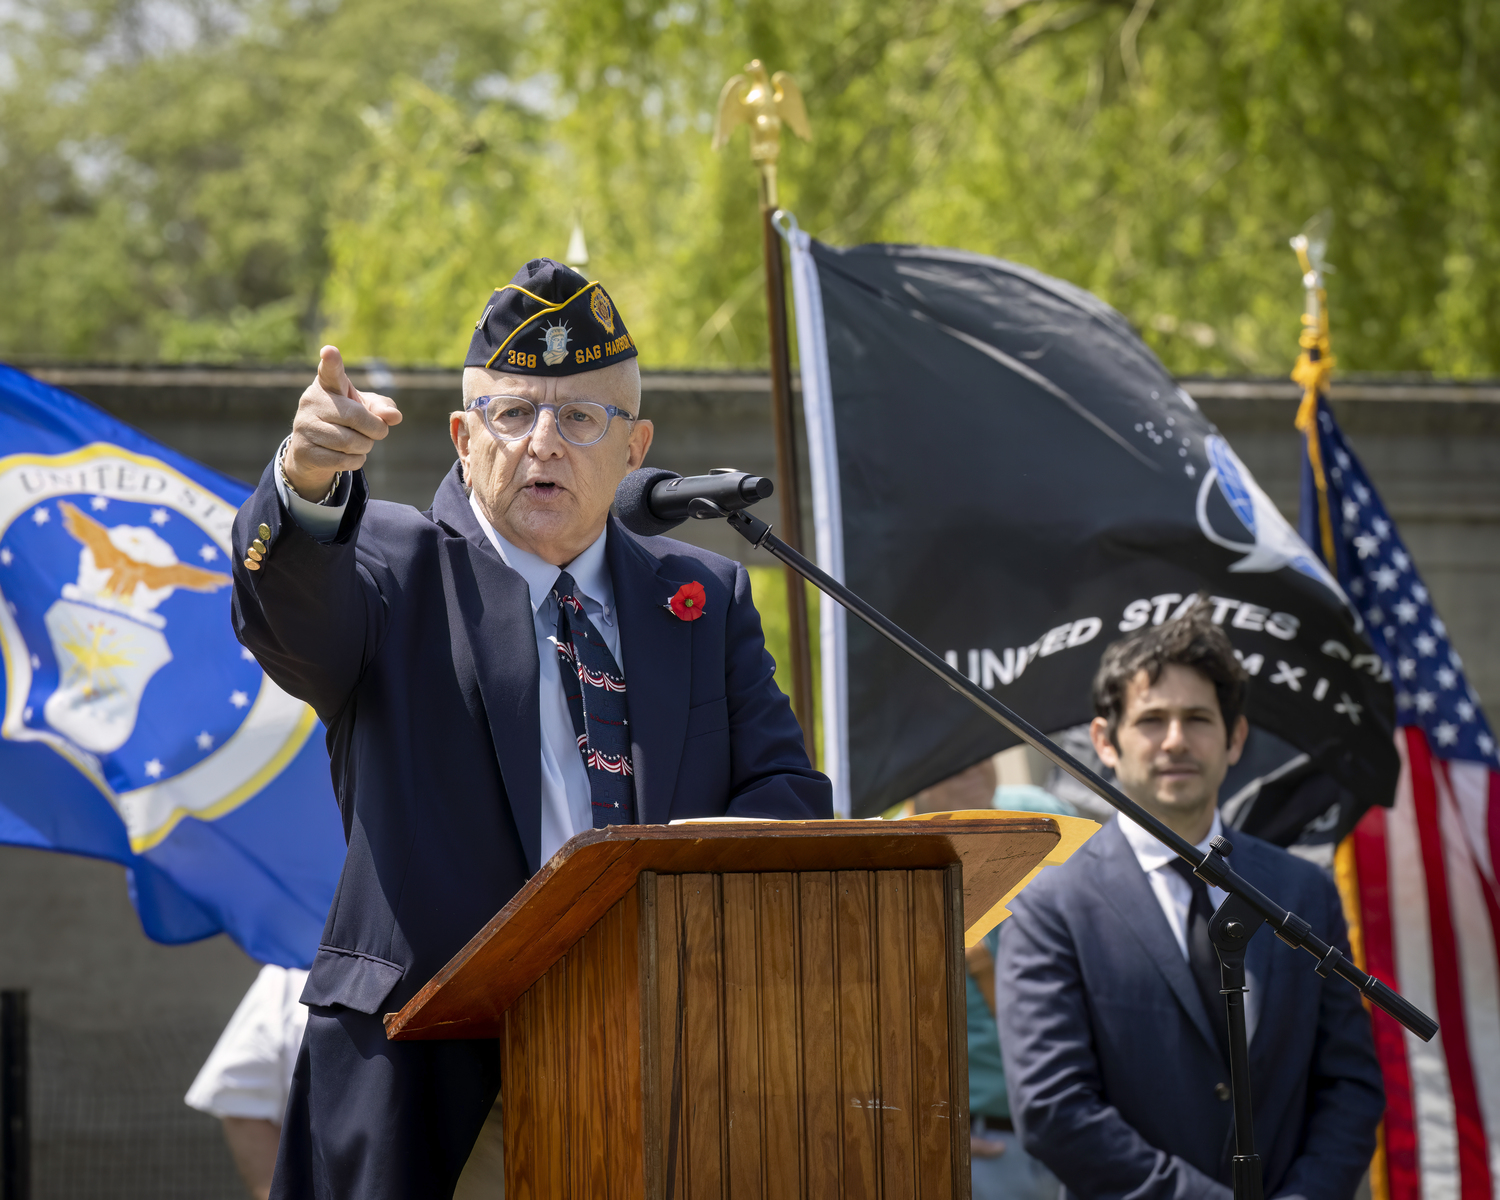 Bill Jones addresses the crowd during the The Memorial Day service in Agawam Park in Southampton Village on Monday.